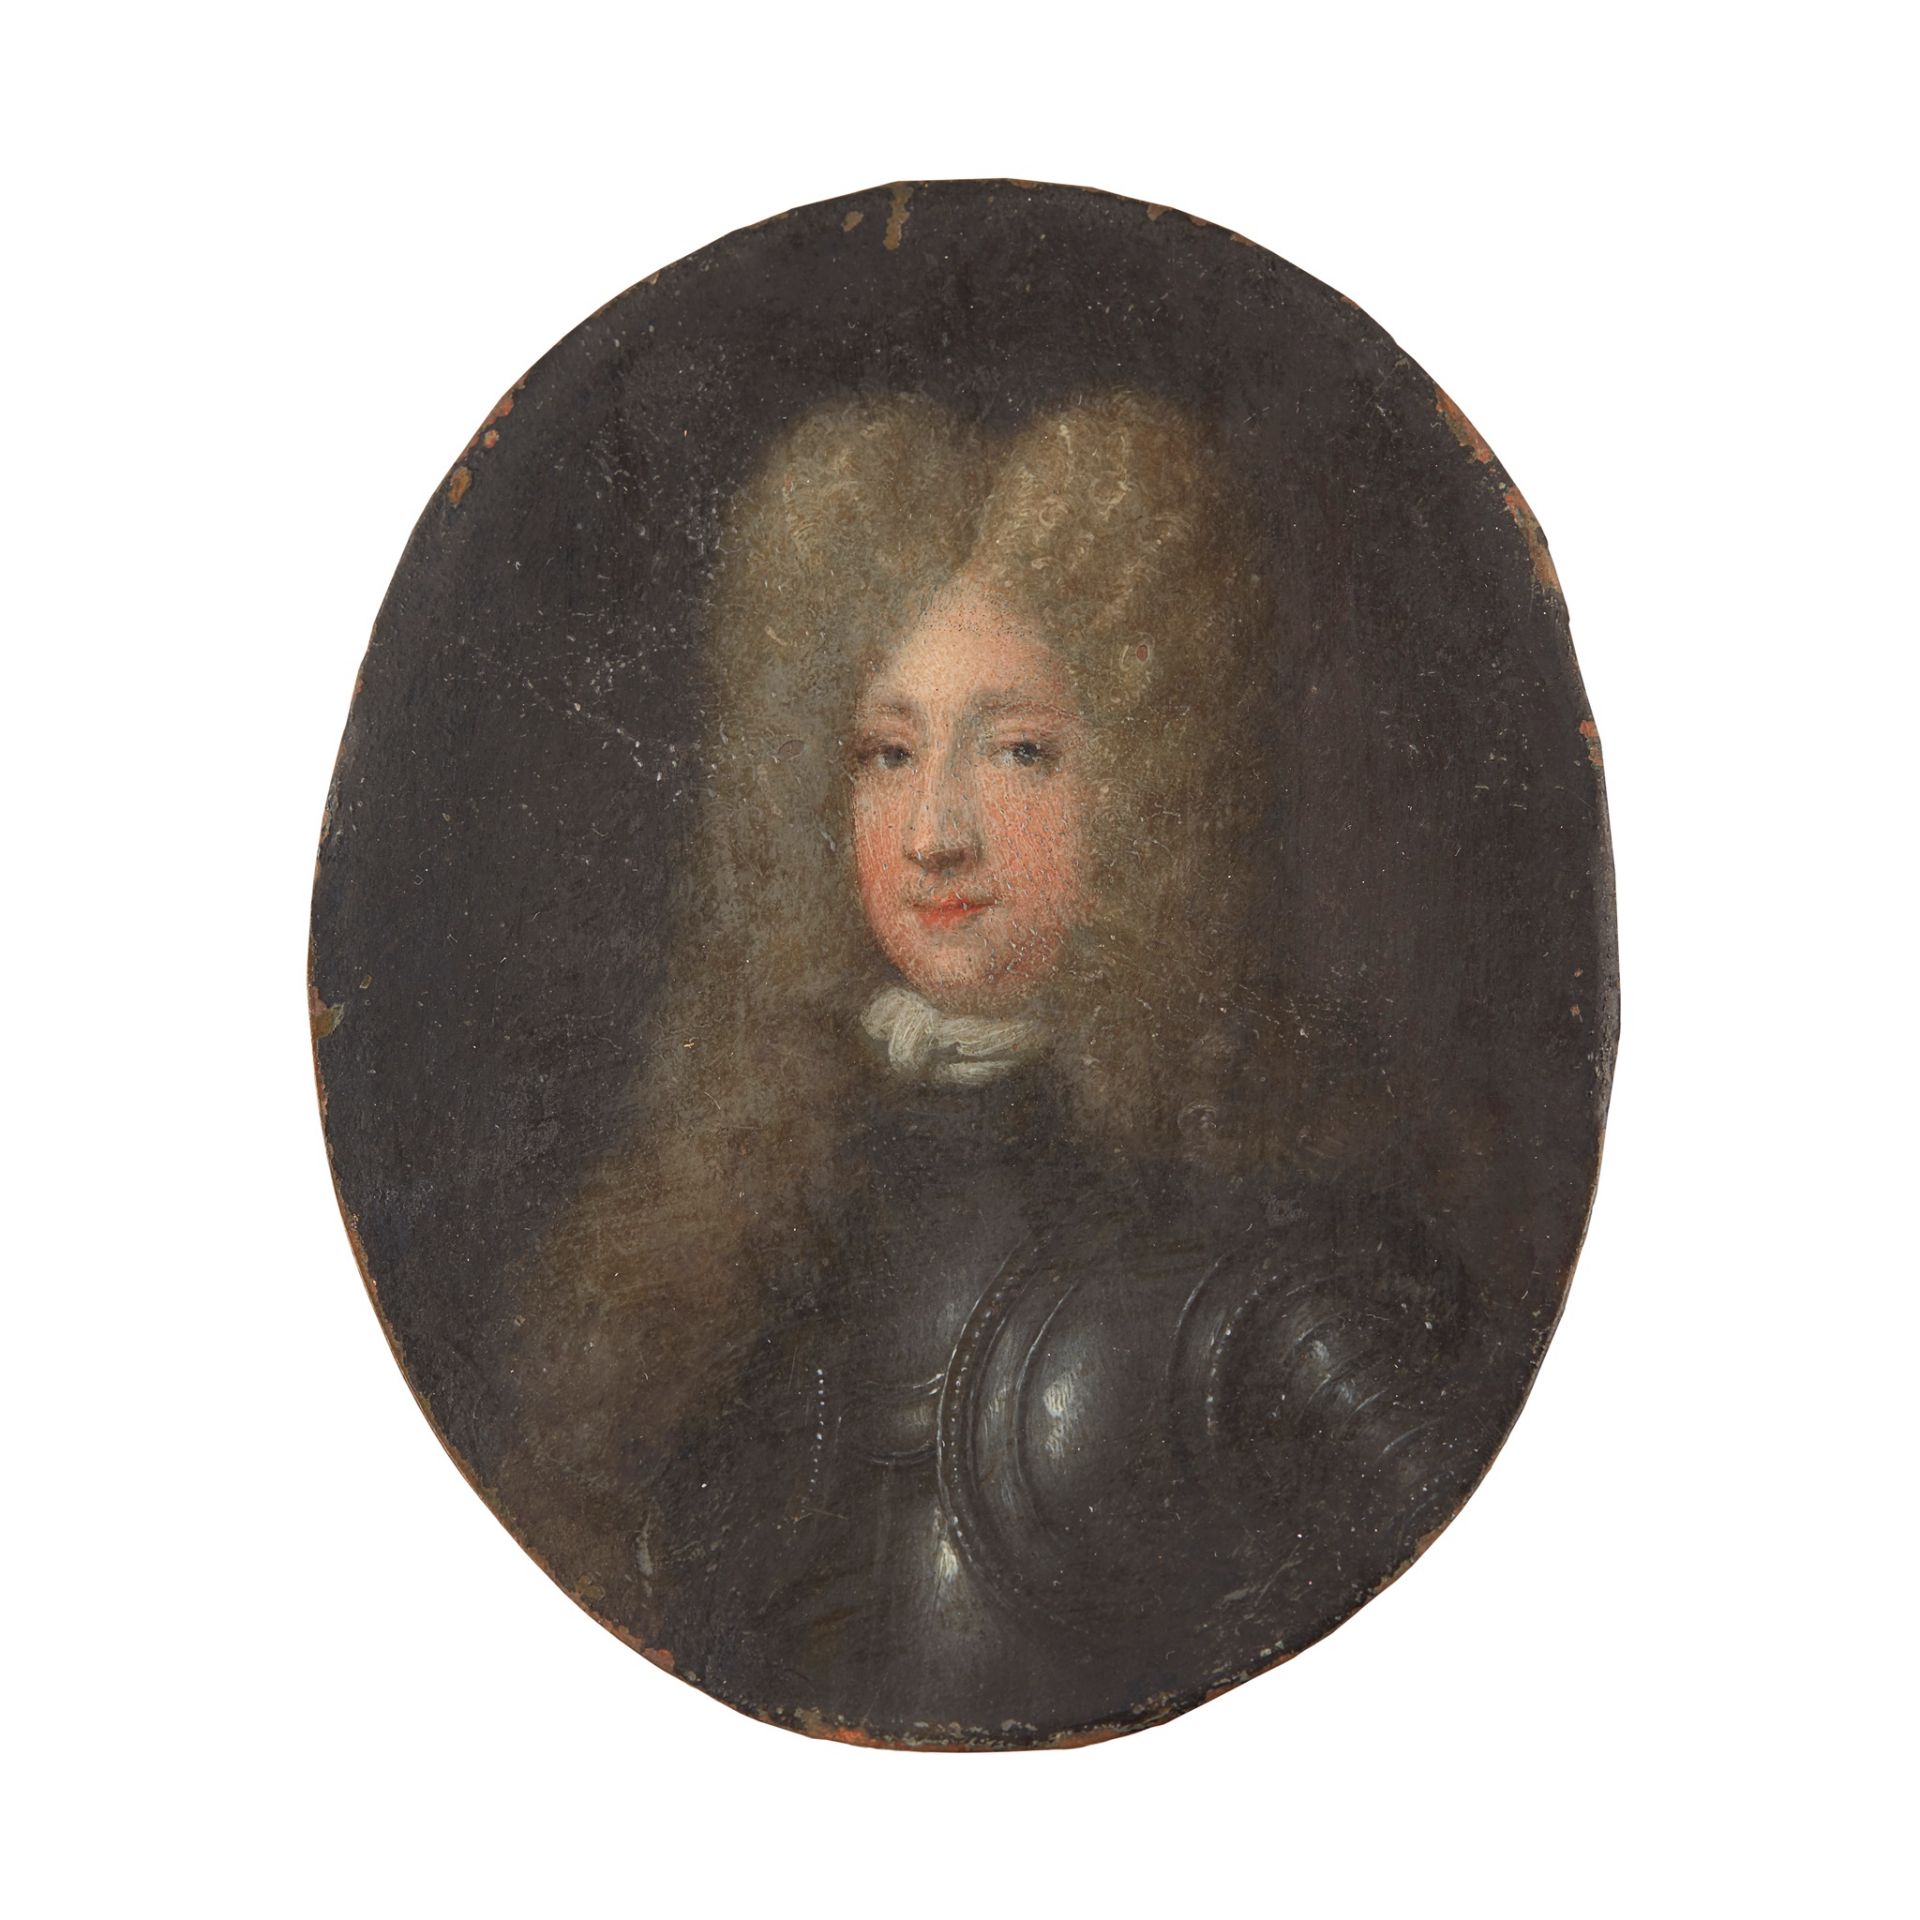 PORTRAIT MINIATURE OF A GENTLEMAN WEARING ARMOUR ENGLISH SCHOOL, EARLY 18TH CENTURY